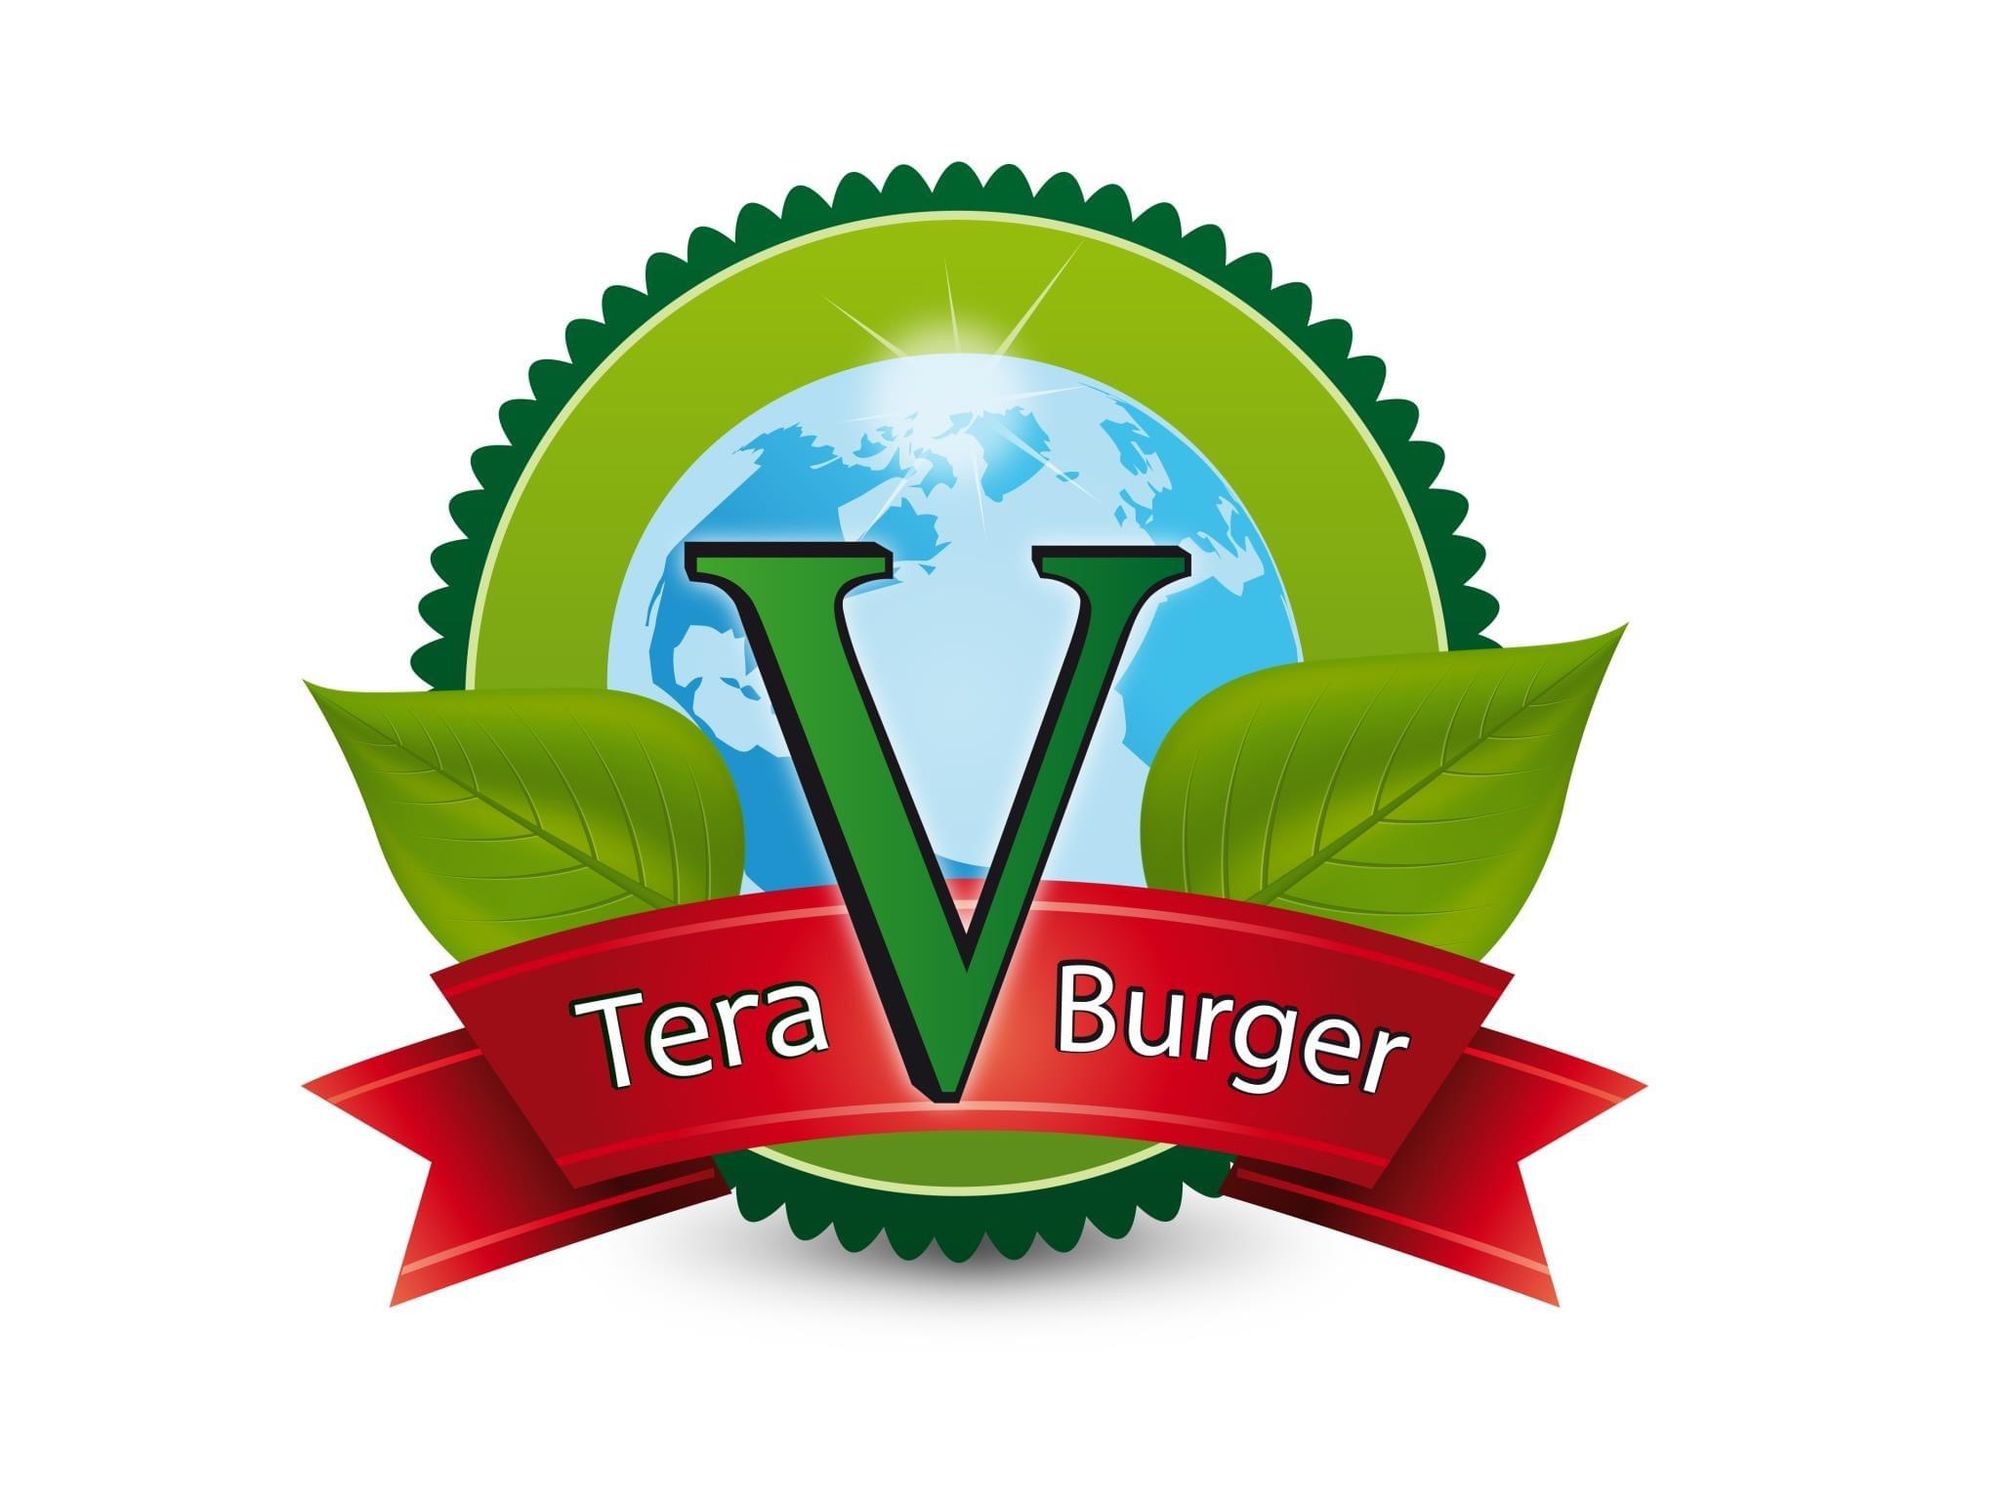 For the Love of Food - Tera v Burger